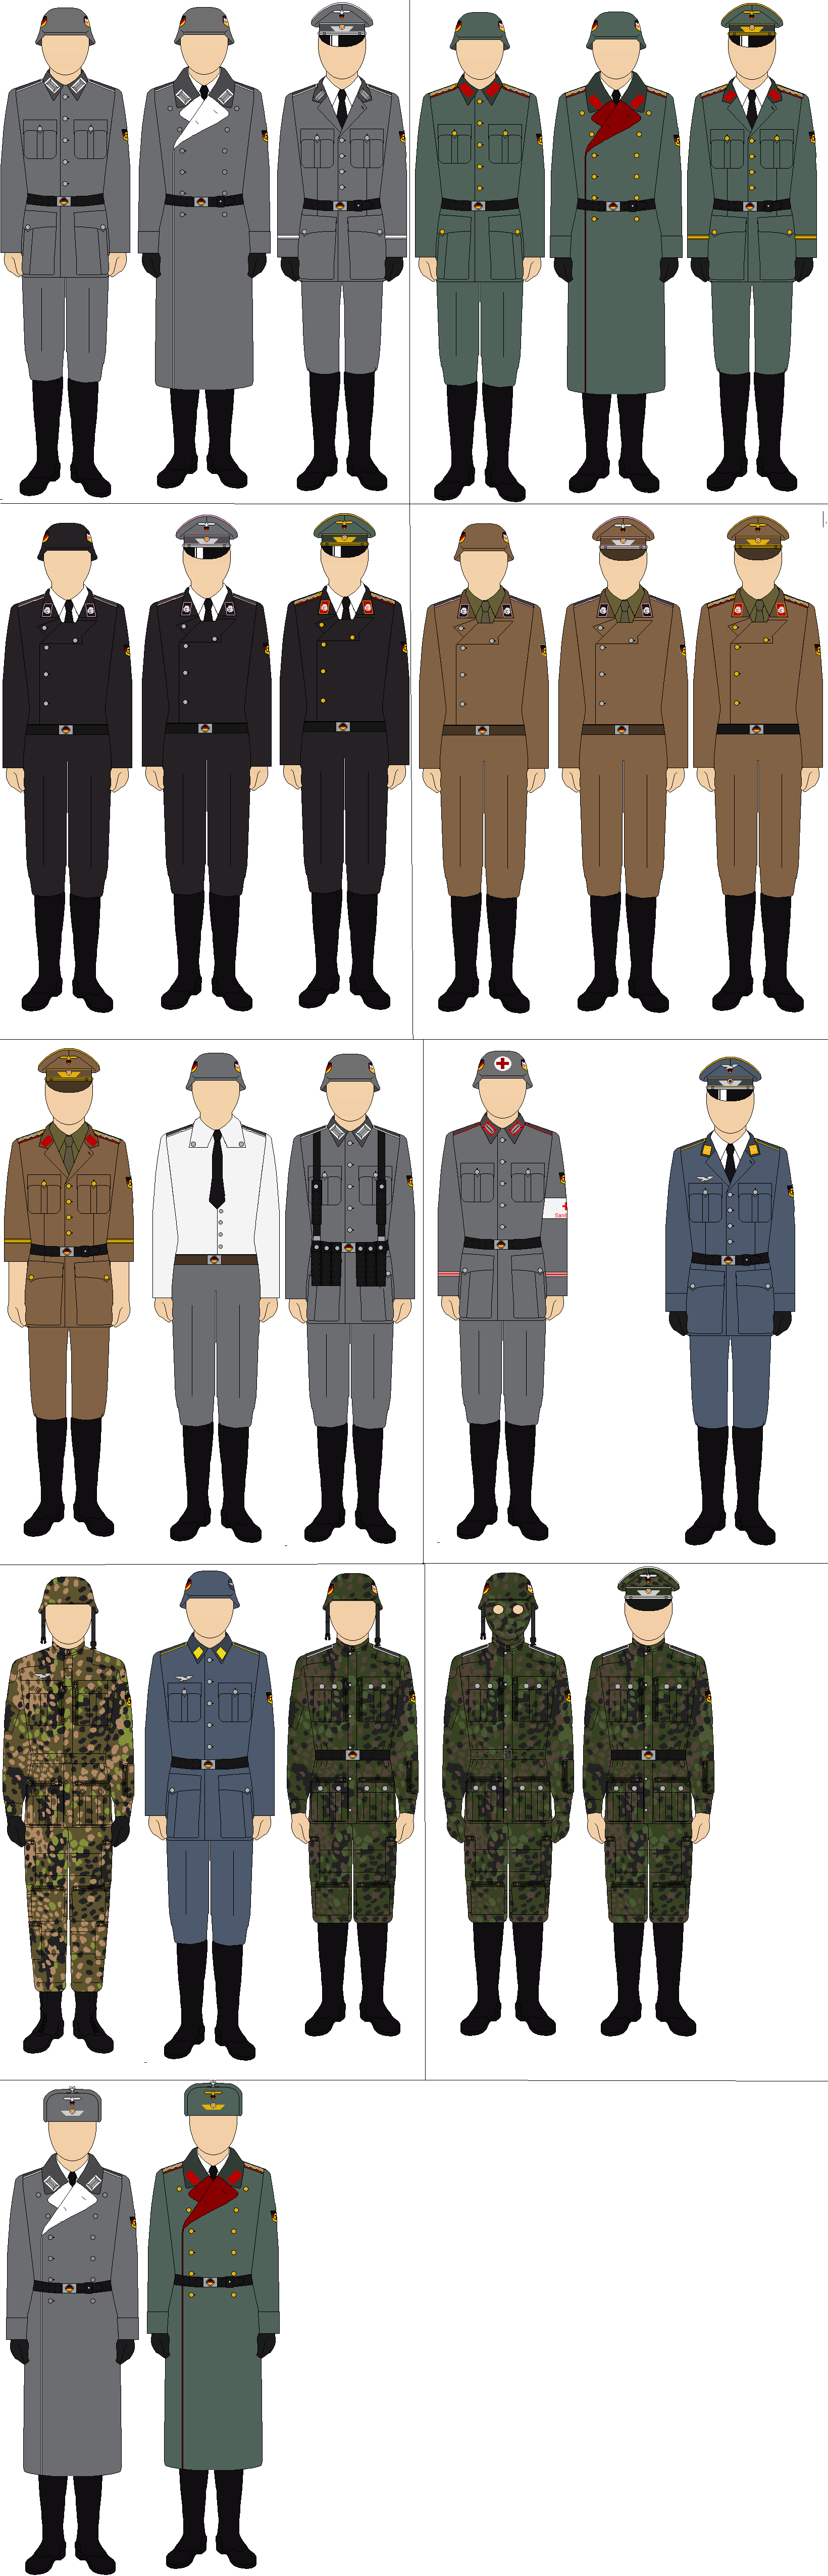 Bundeswehr uniforms of different branches and serv by Luke27262 on ...